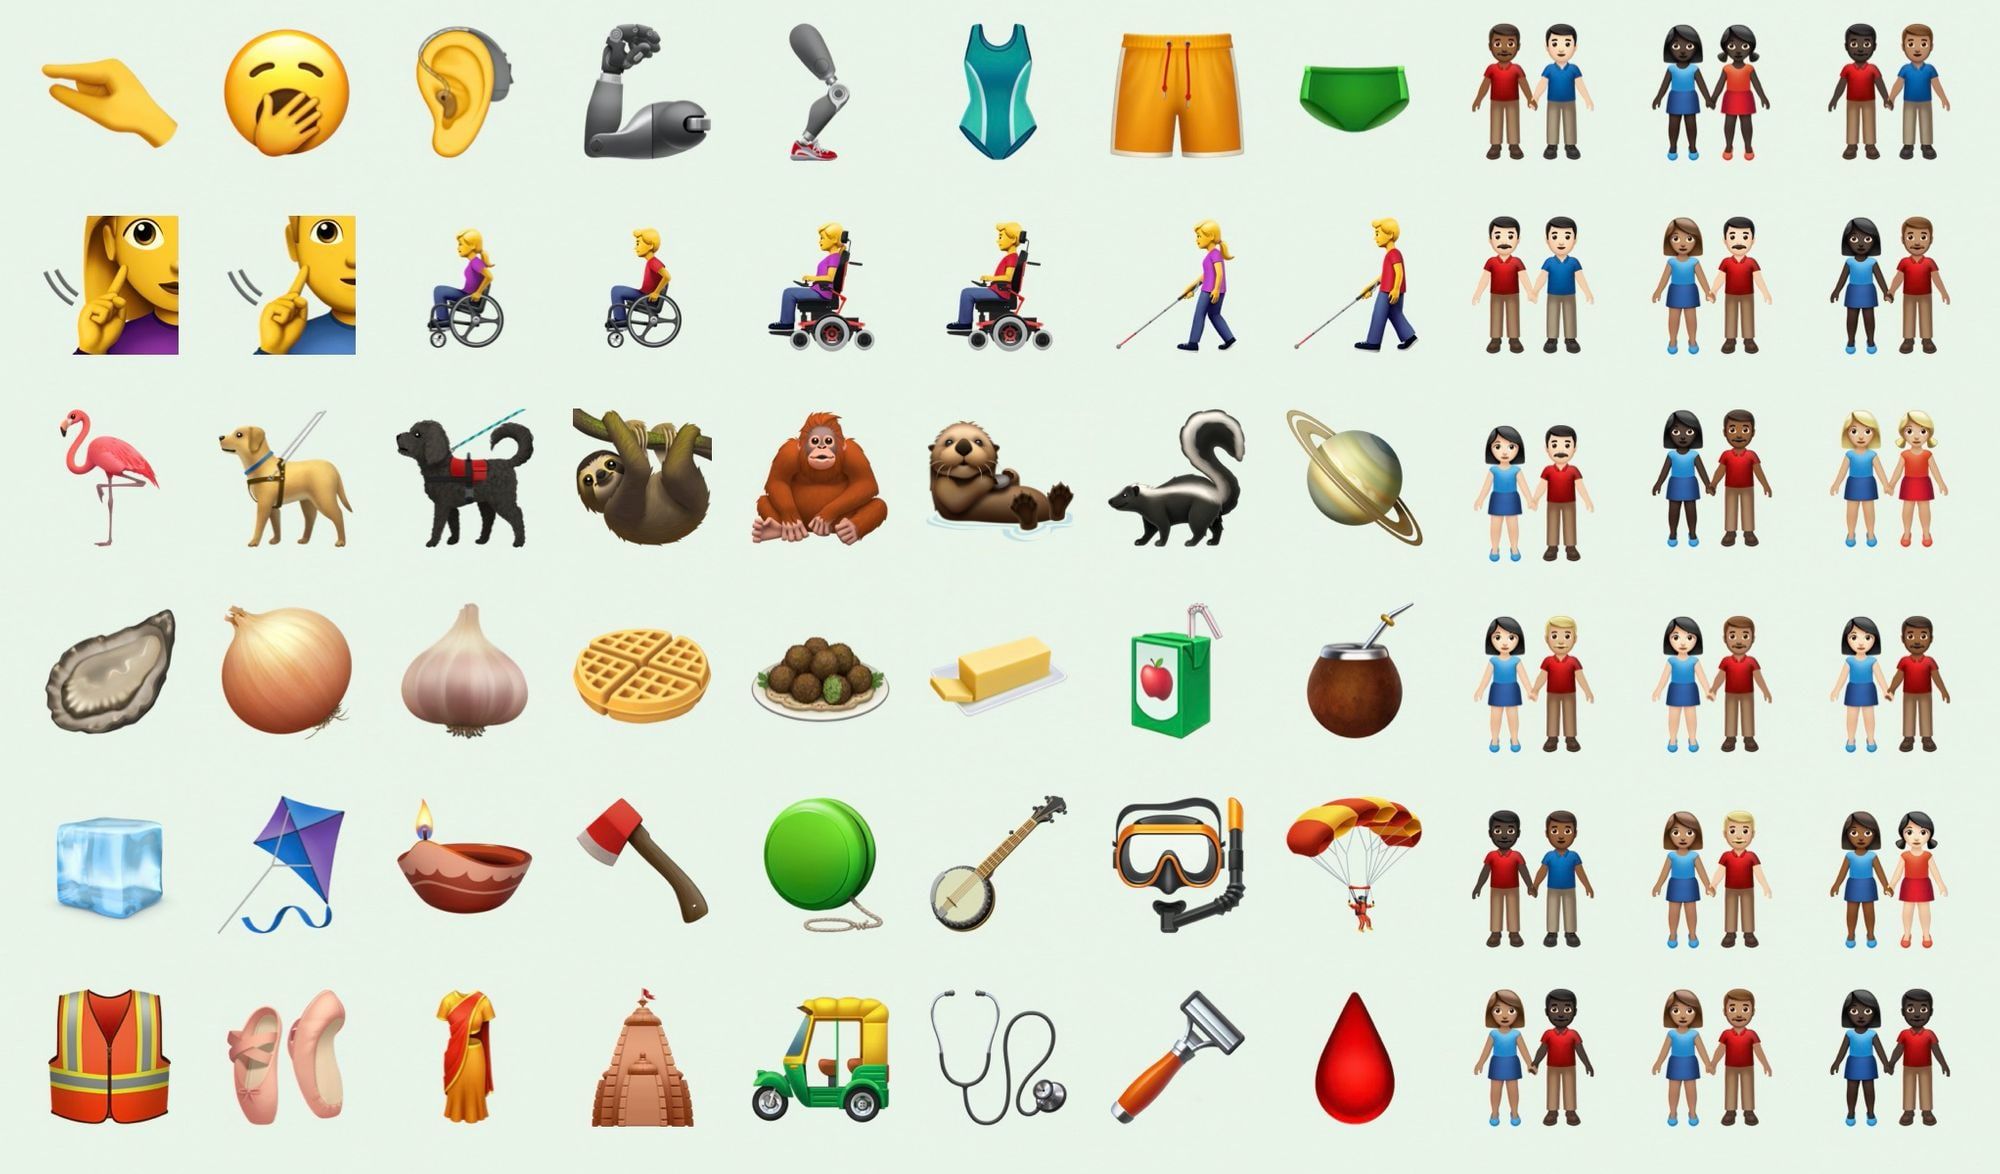 First Look: New Emojis in iOS 13.2